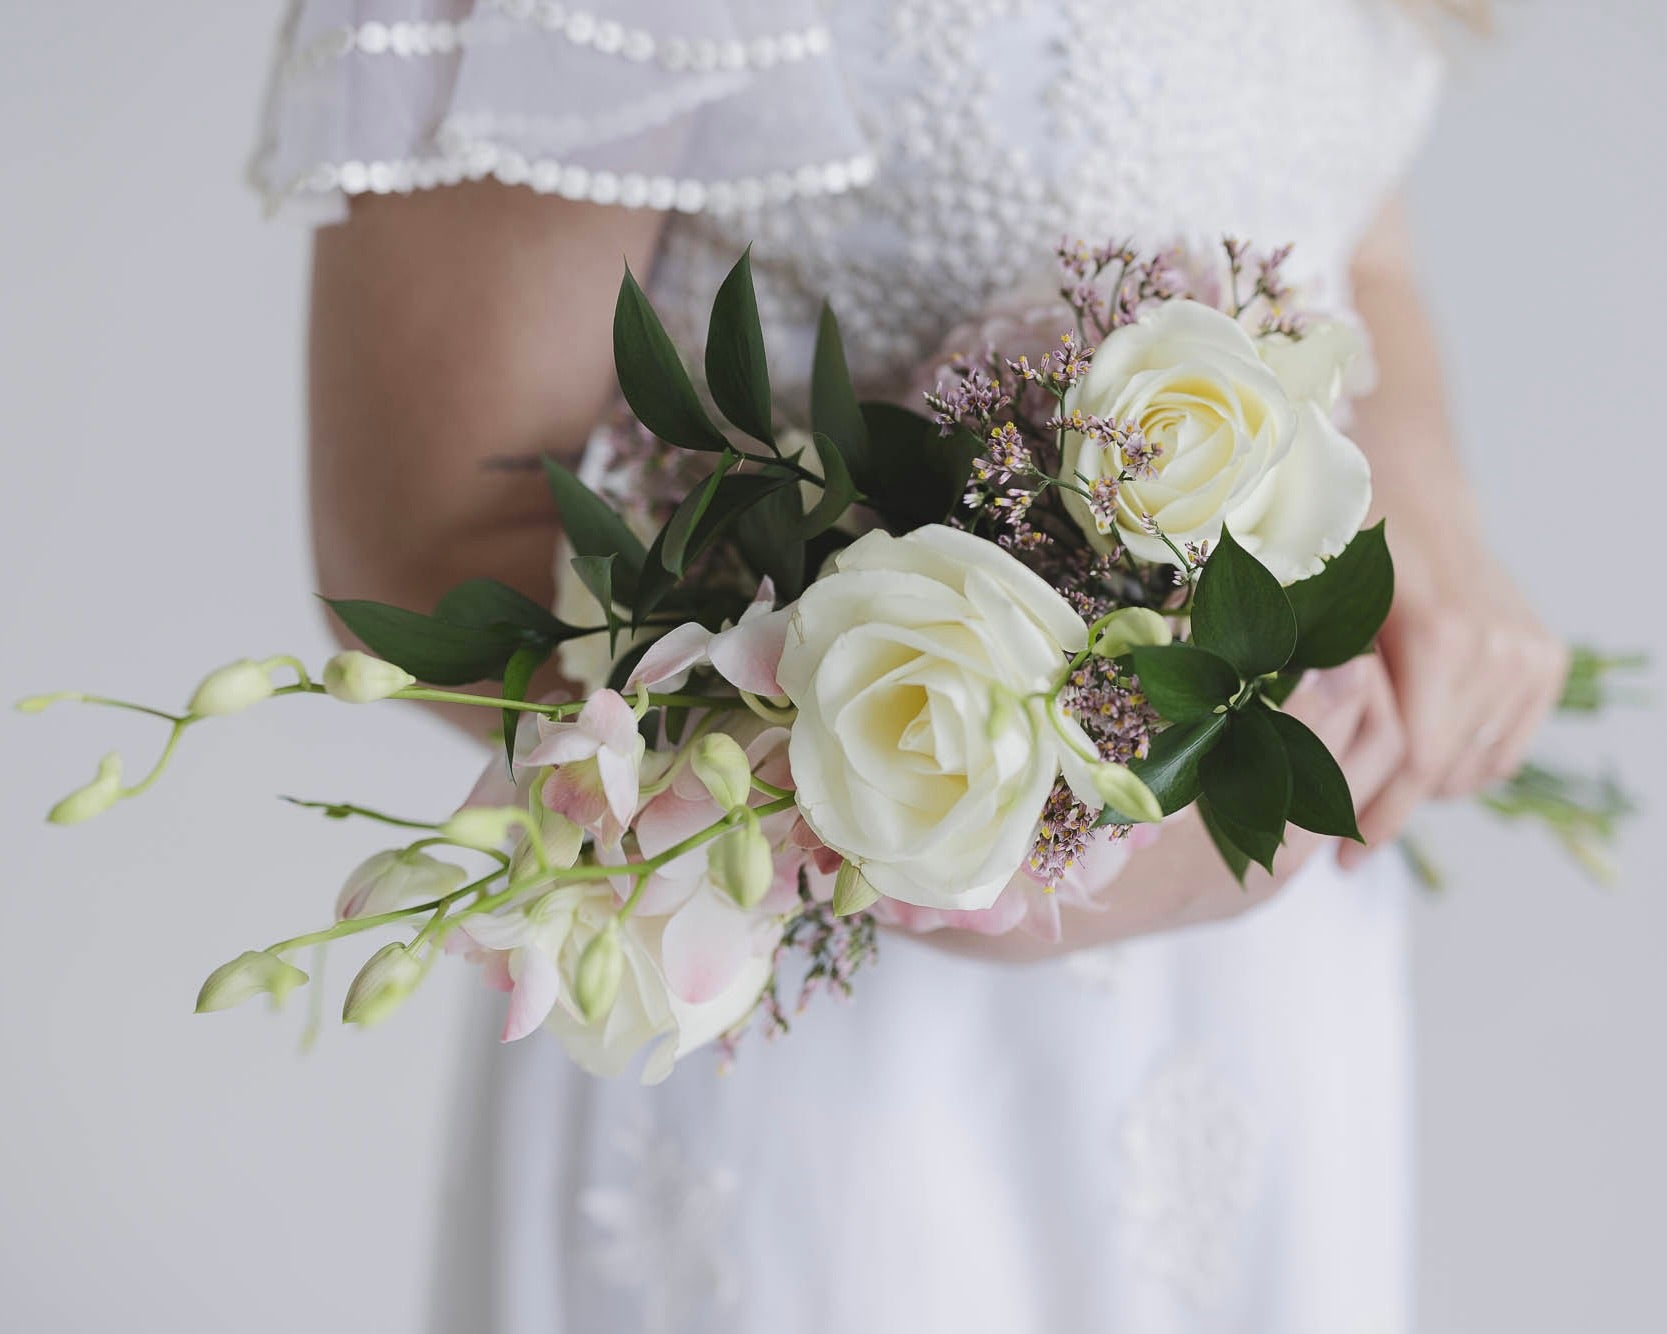 Transform Your Wedding with Aster Lane's Exquisite Florals